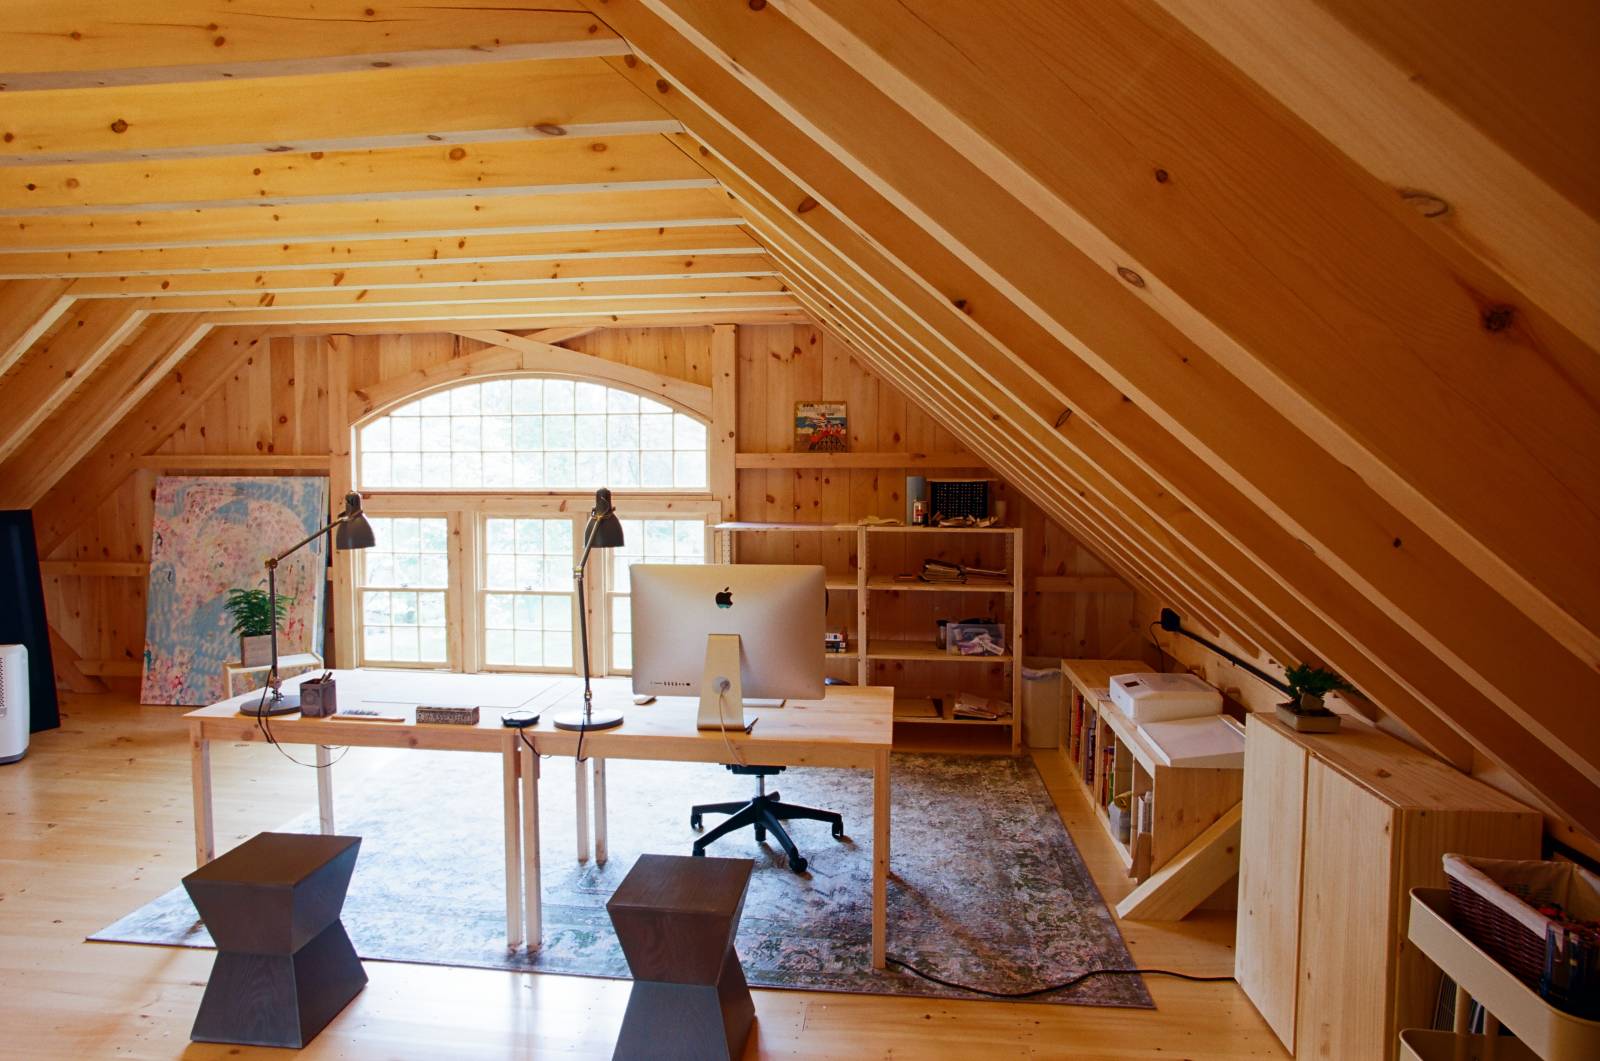 An inspiring post & beam barn interior space for graphic design